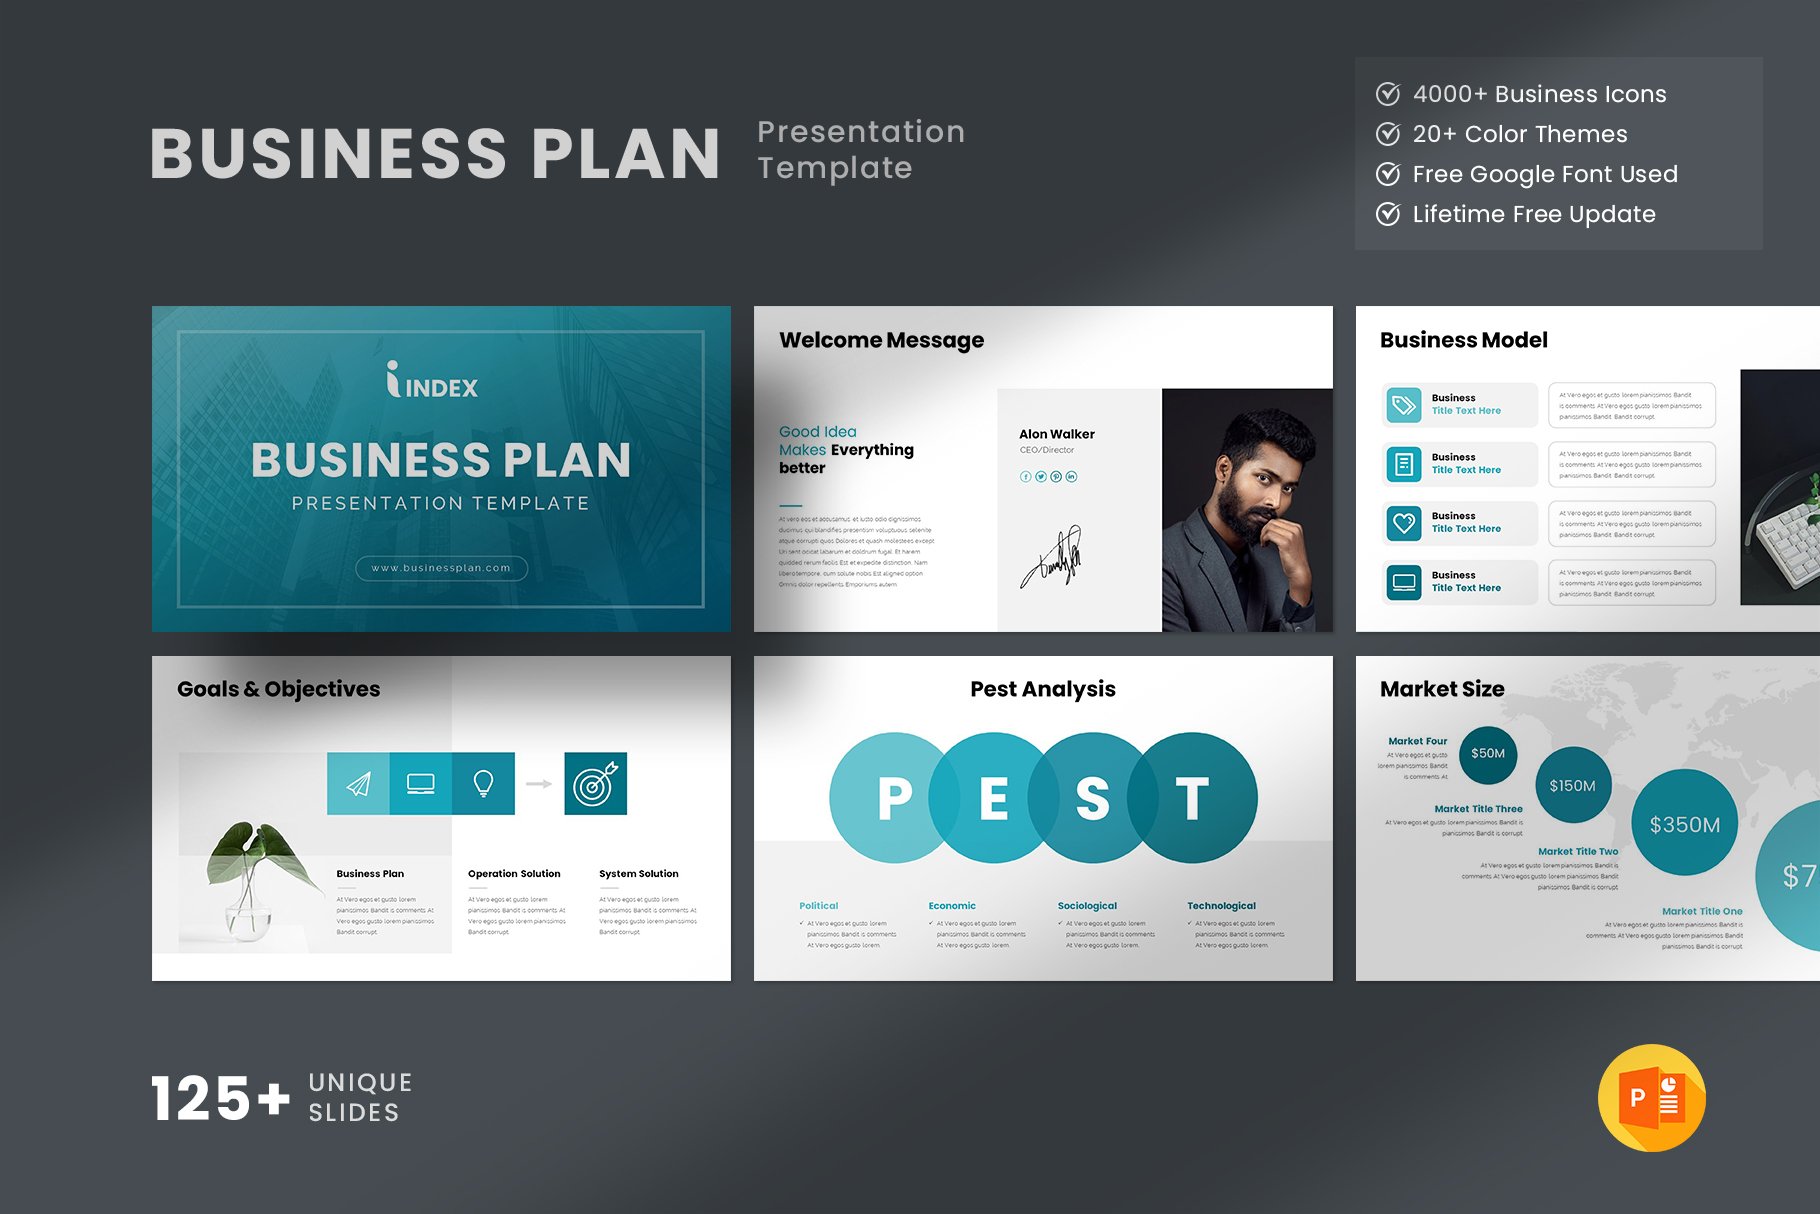 a business plan presentation should cover